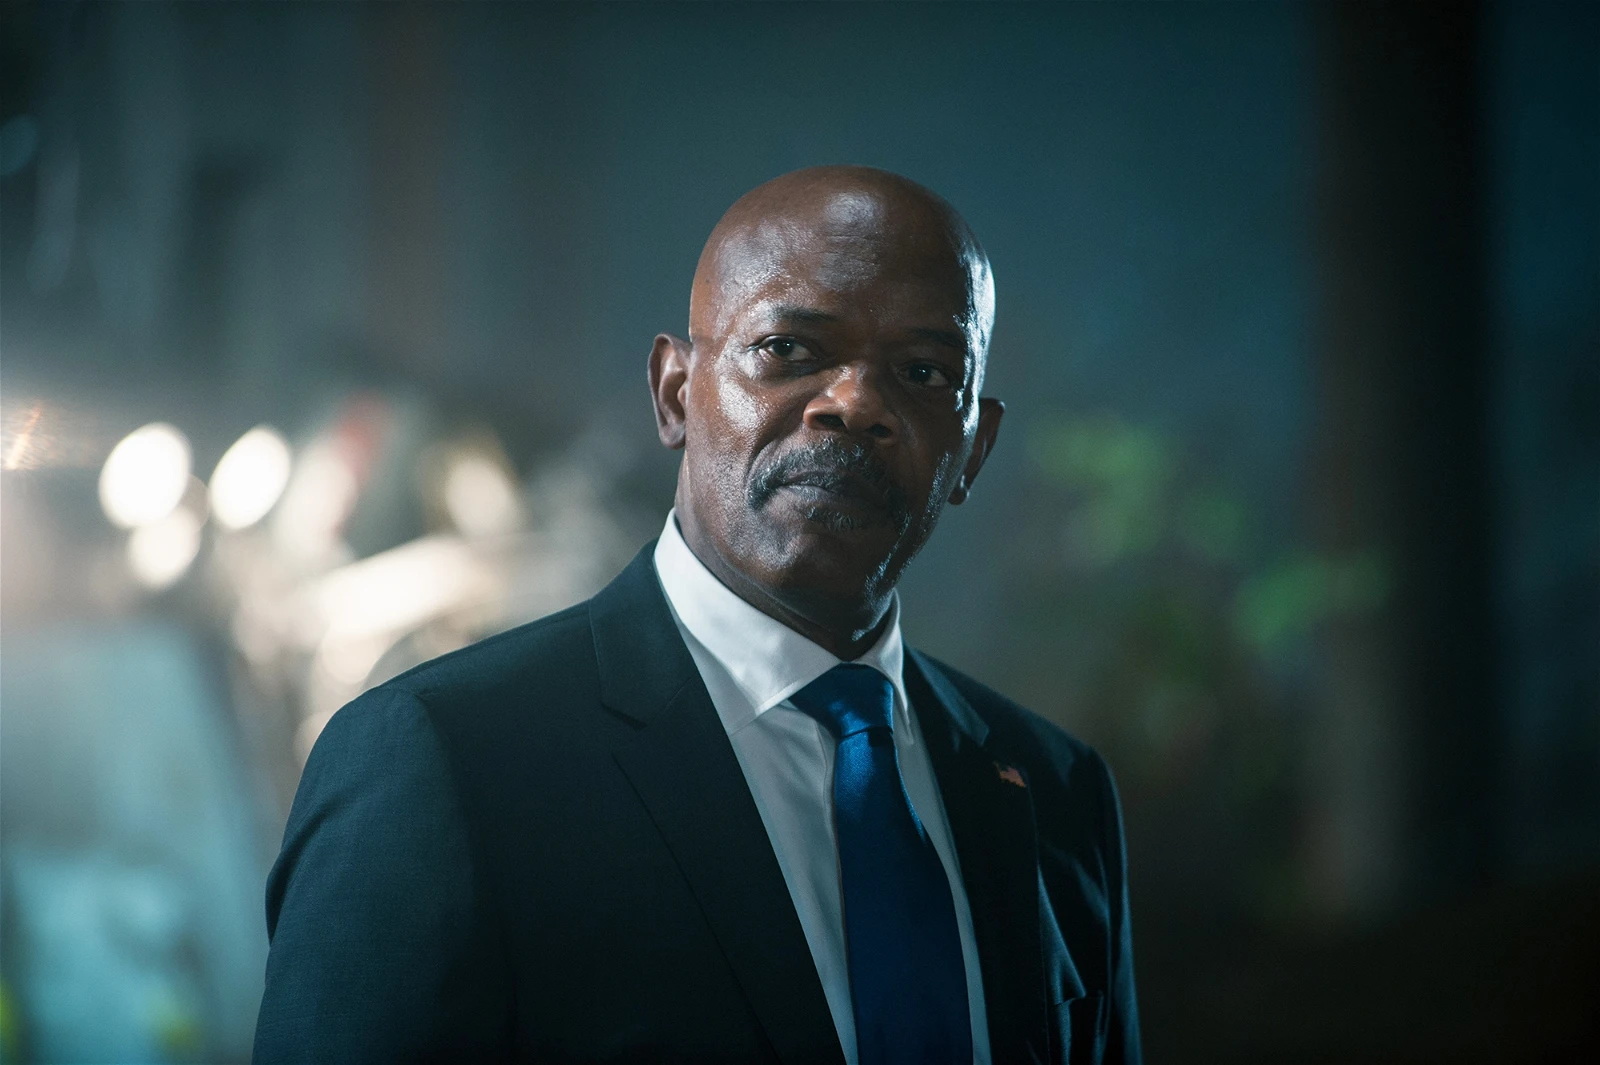 Secret Invasion's Samuel L. Jackson on AI, Use of Likeness in MCU – The  Hollywood Reporter